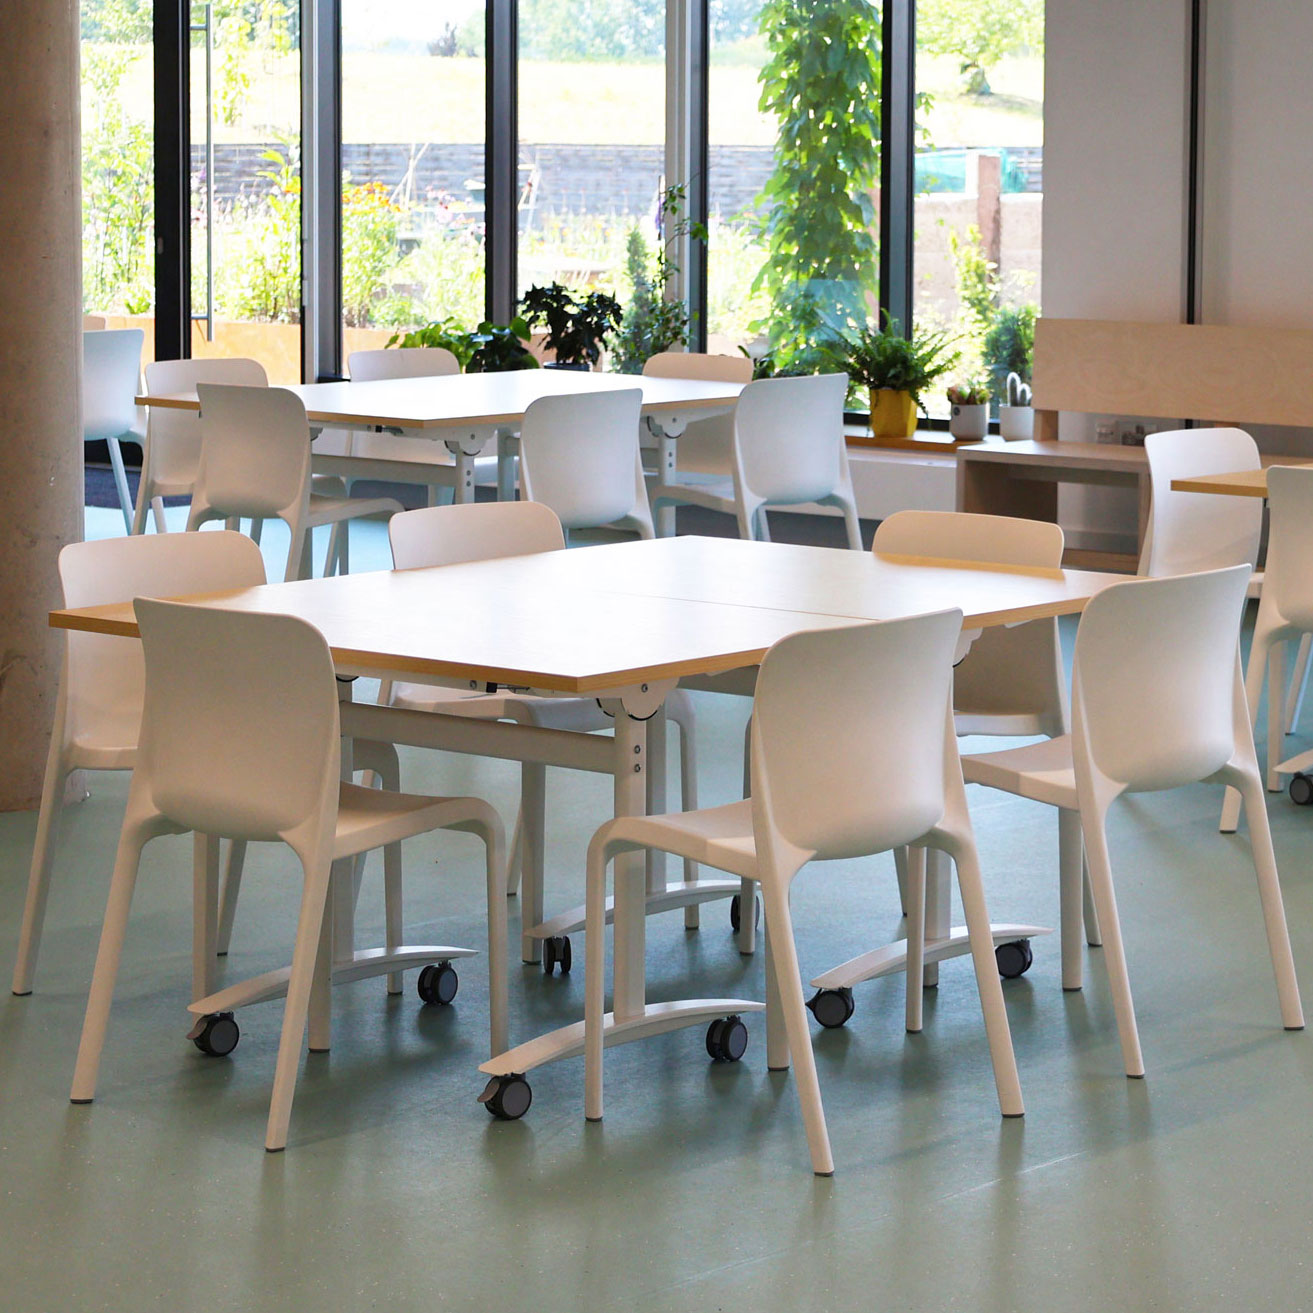 School Dining Chairs